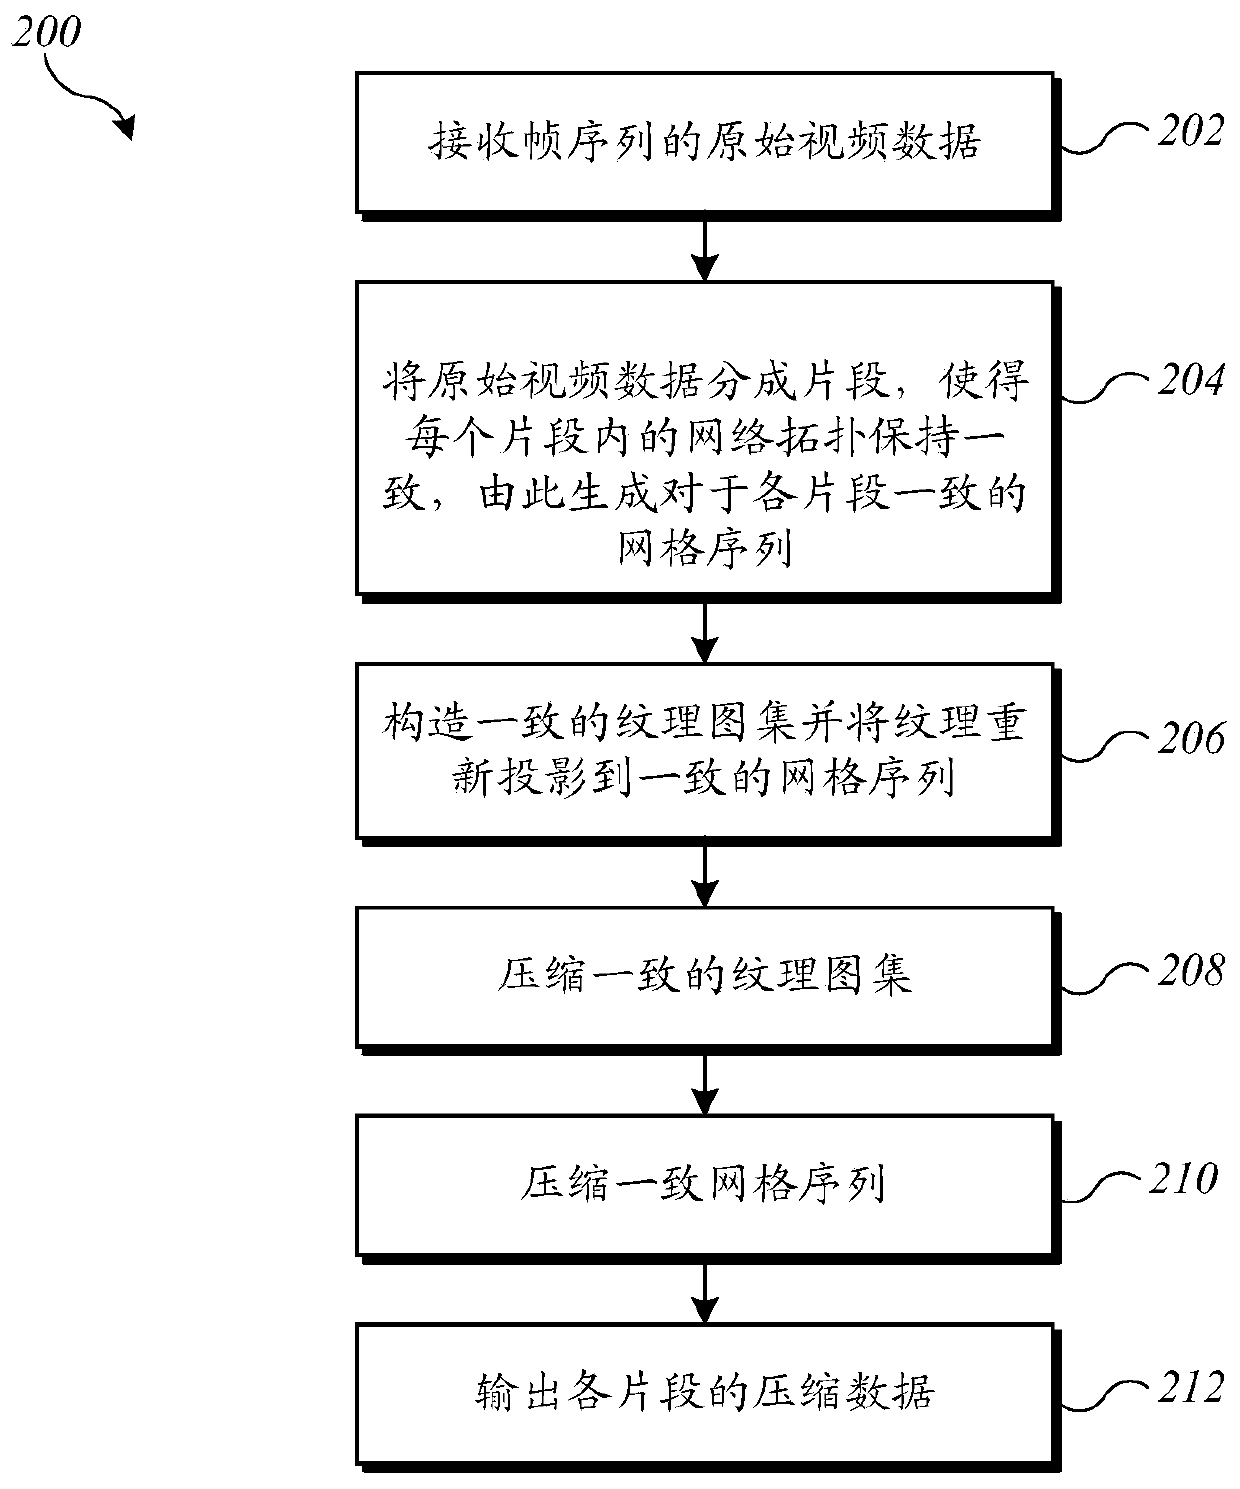 Method and system for compressing data implemented by computer, and storage medium